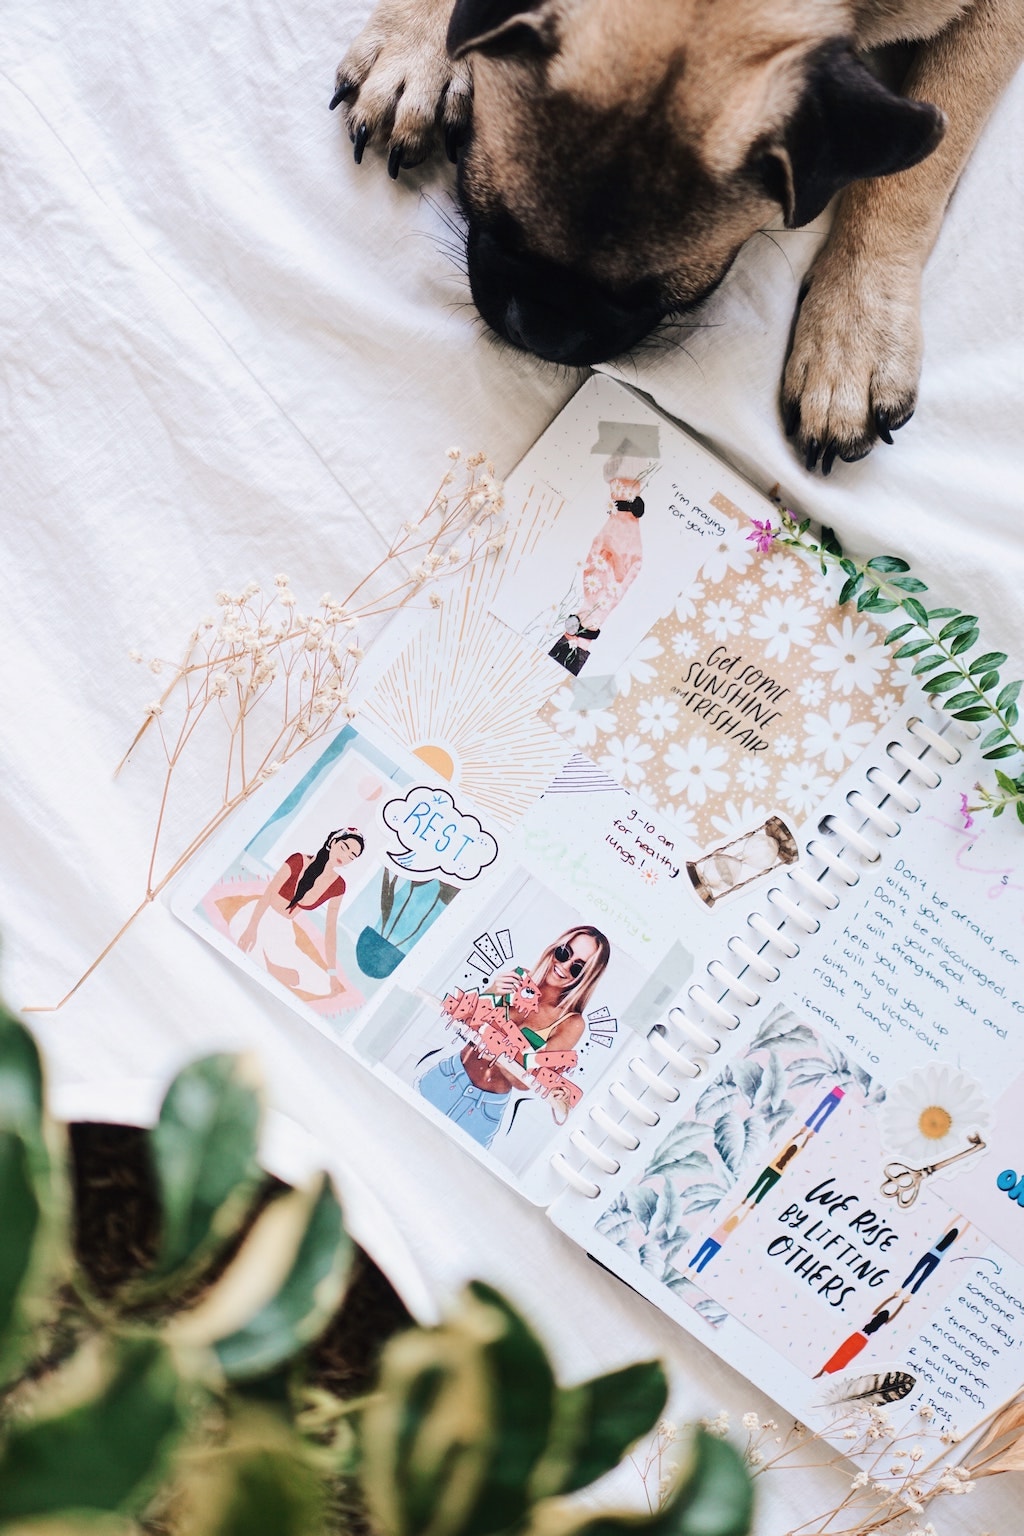 HOW TO CREATE A VISION BOARD IN YOUR BULLET JOURNAL 